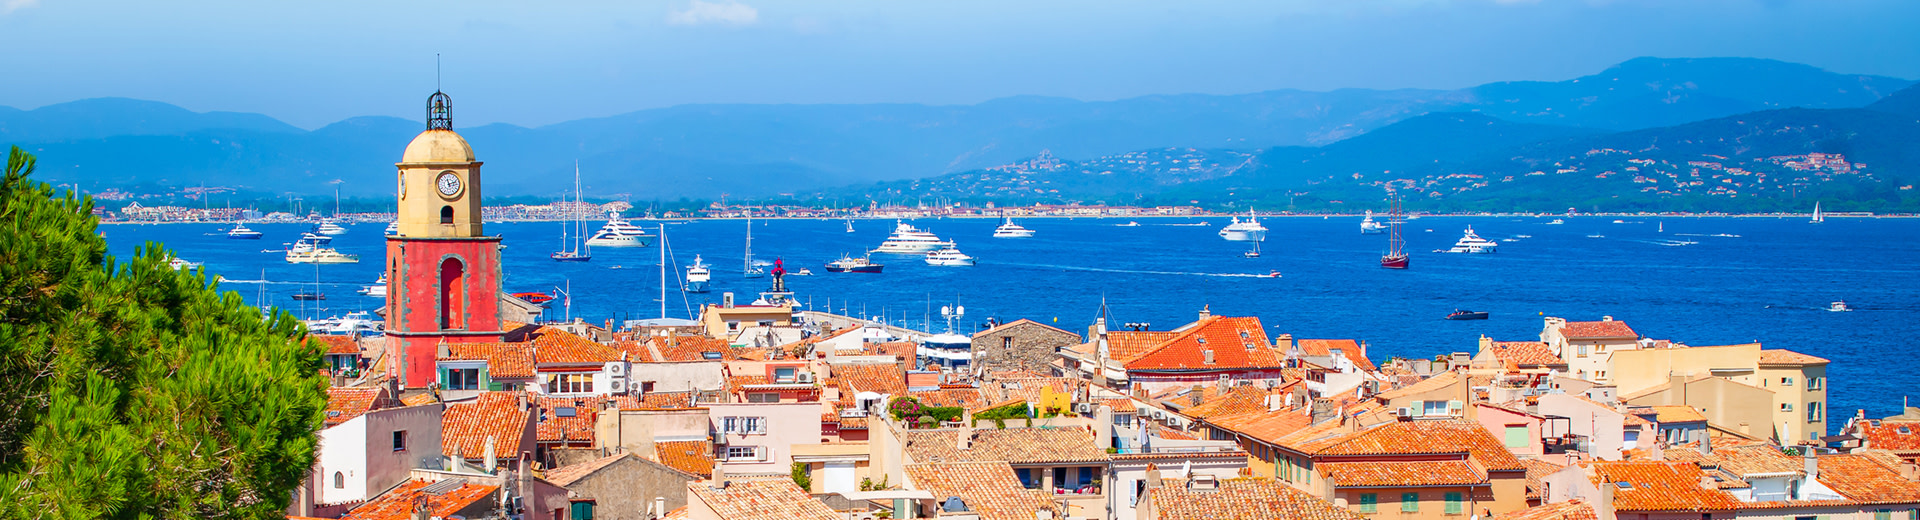 A harbor view of Saint Tropez with a church steeple and roofs in the foreground and blue water dotted with boats in the background.